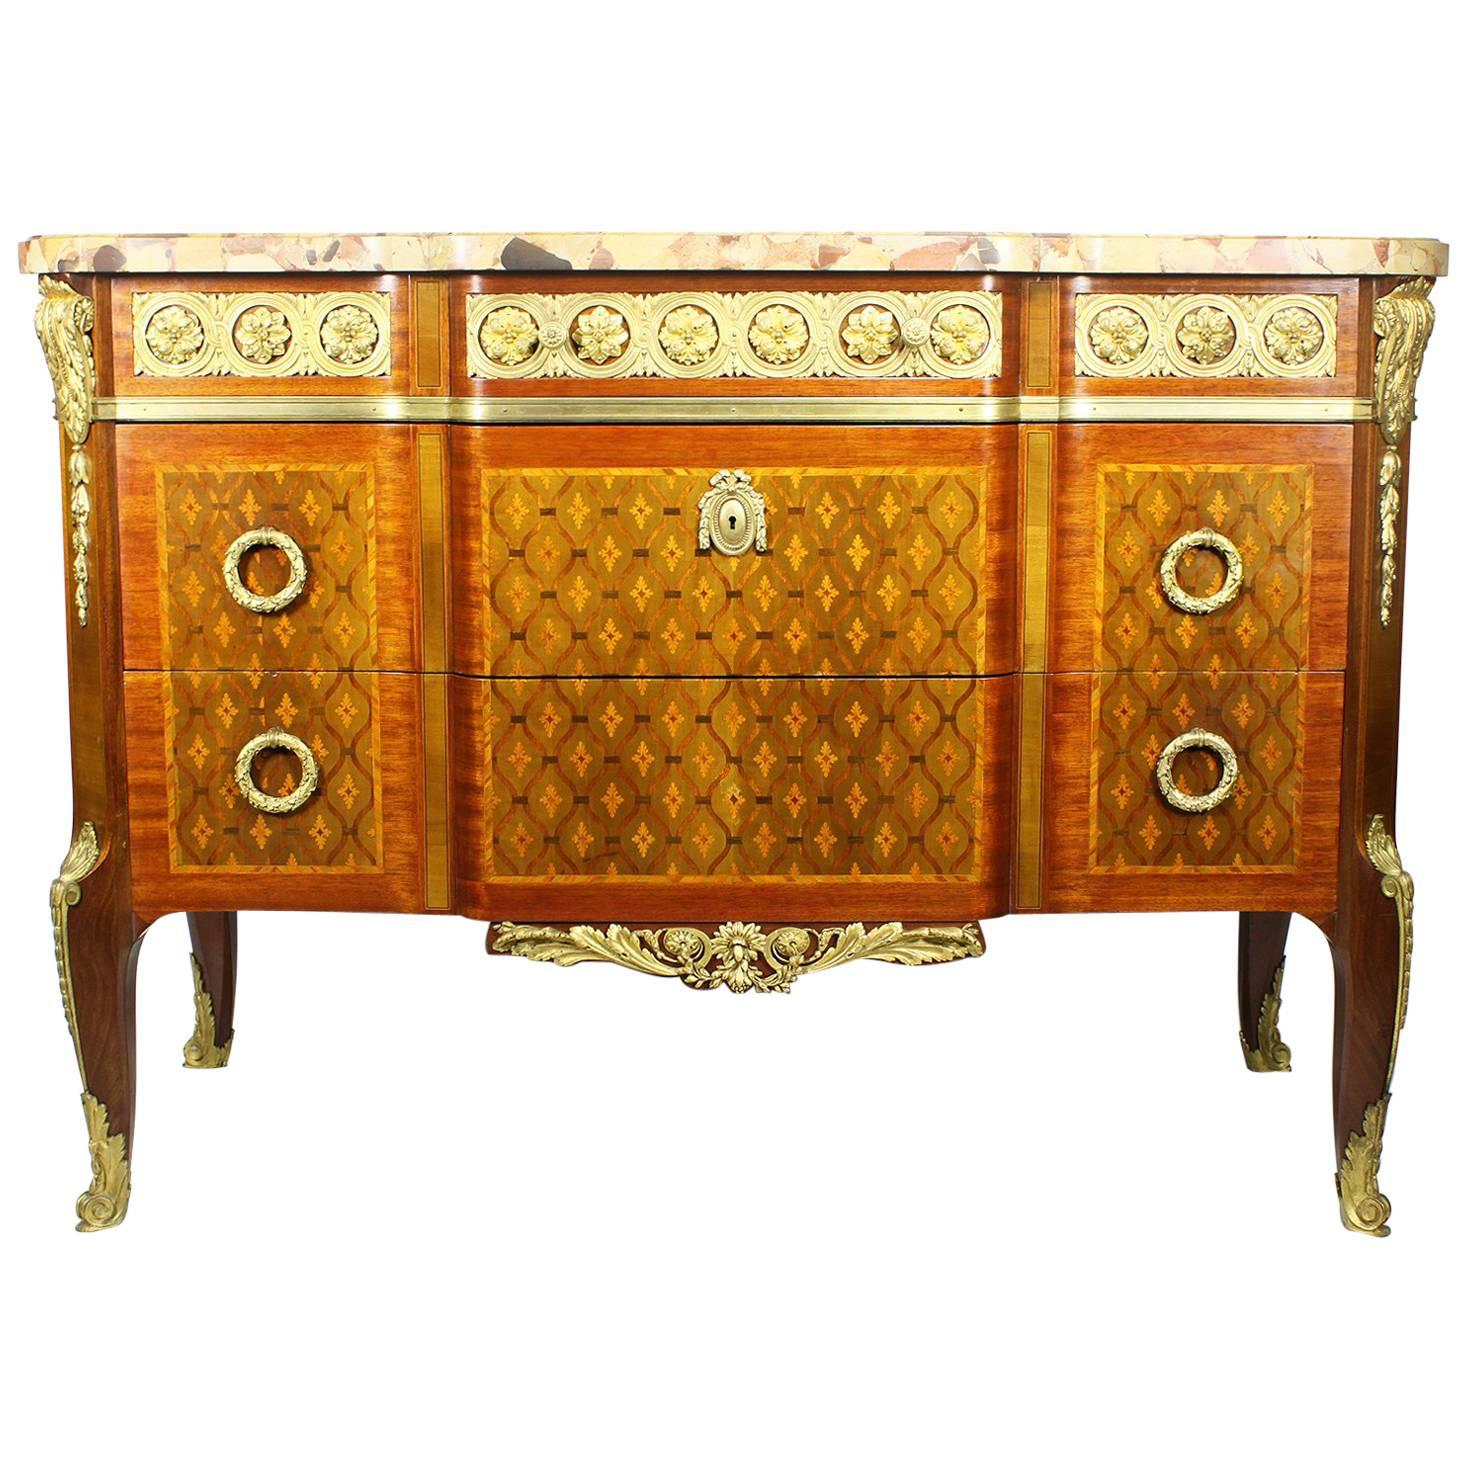 French 19th Century Finely Chased Ormolu Mounted Regence Style Marquetry Commode